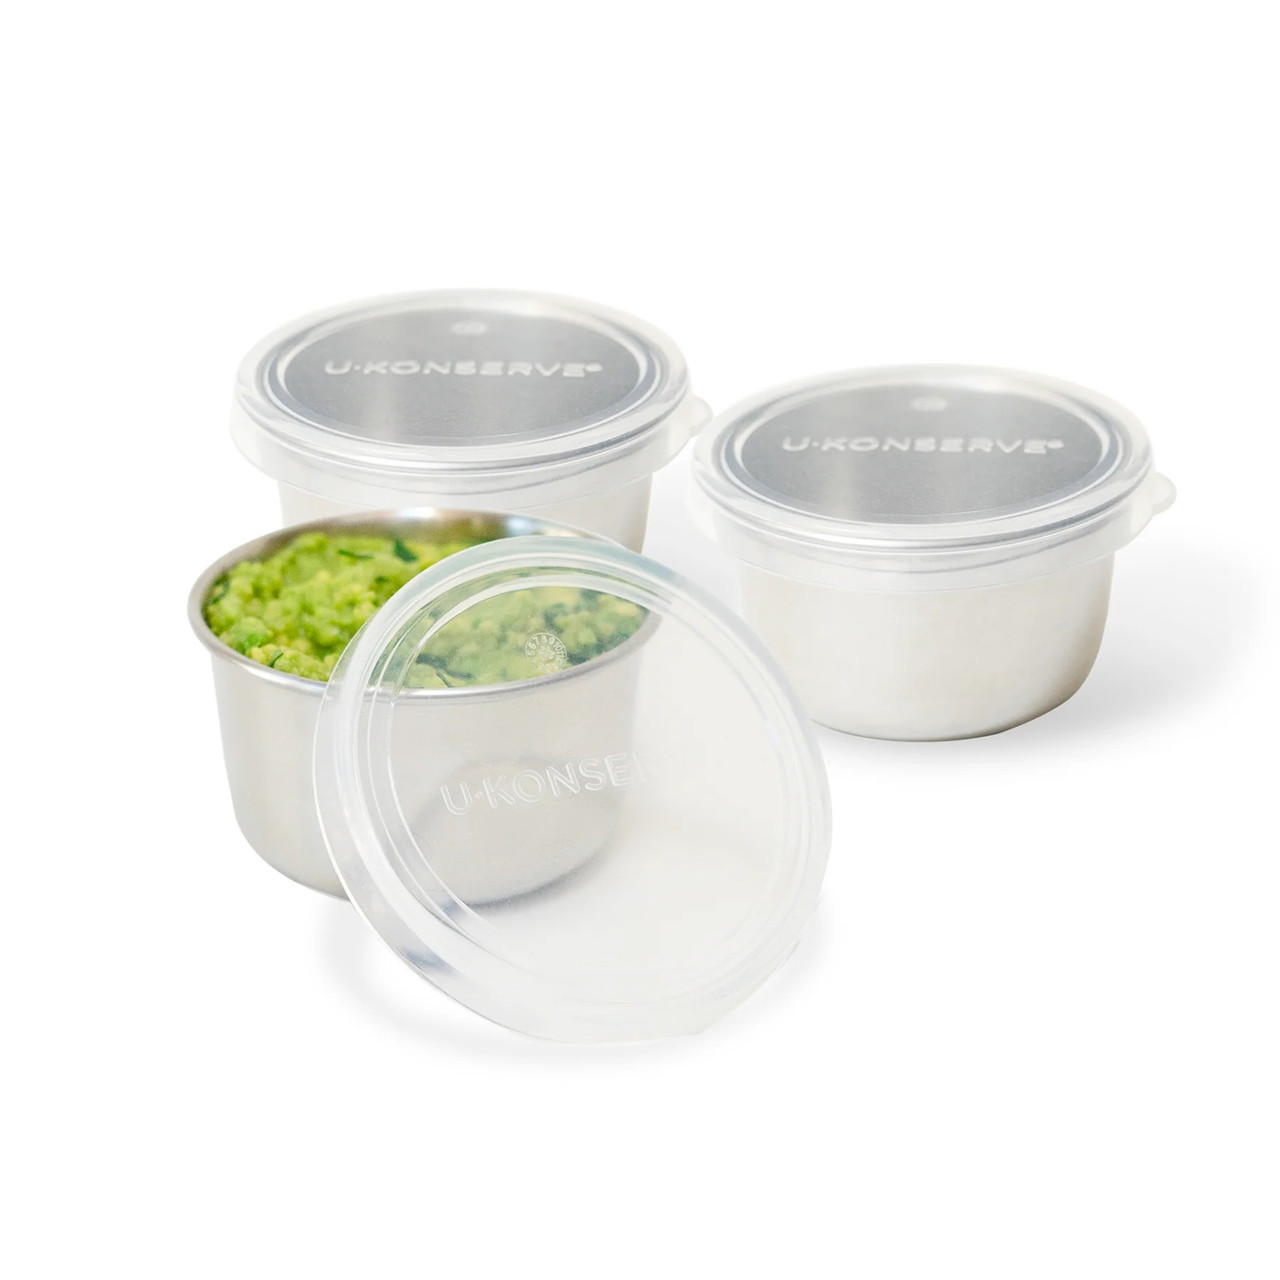 U Konserve Stainless Steel Mini 2.5 Ounce Food Container, Set of 3